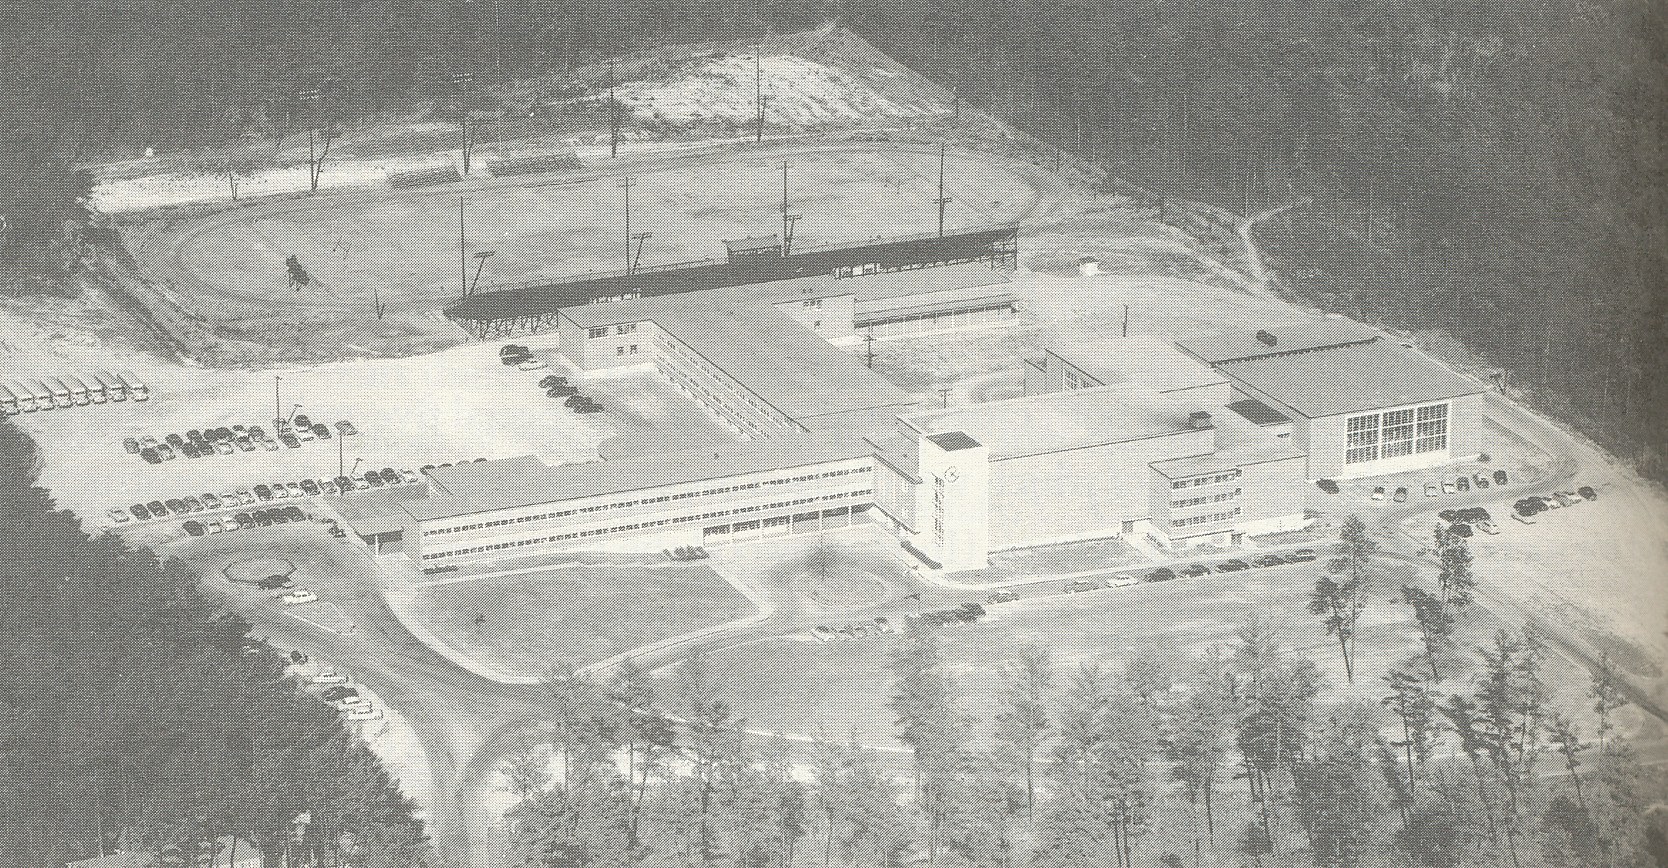 SHADES VALLEY HIGH SCHOOL AS IT APPEARED AT ITS OPENING AROUND 1950.(Click to enlarge.)